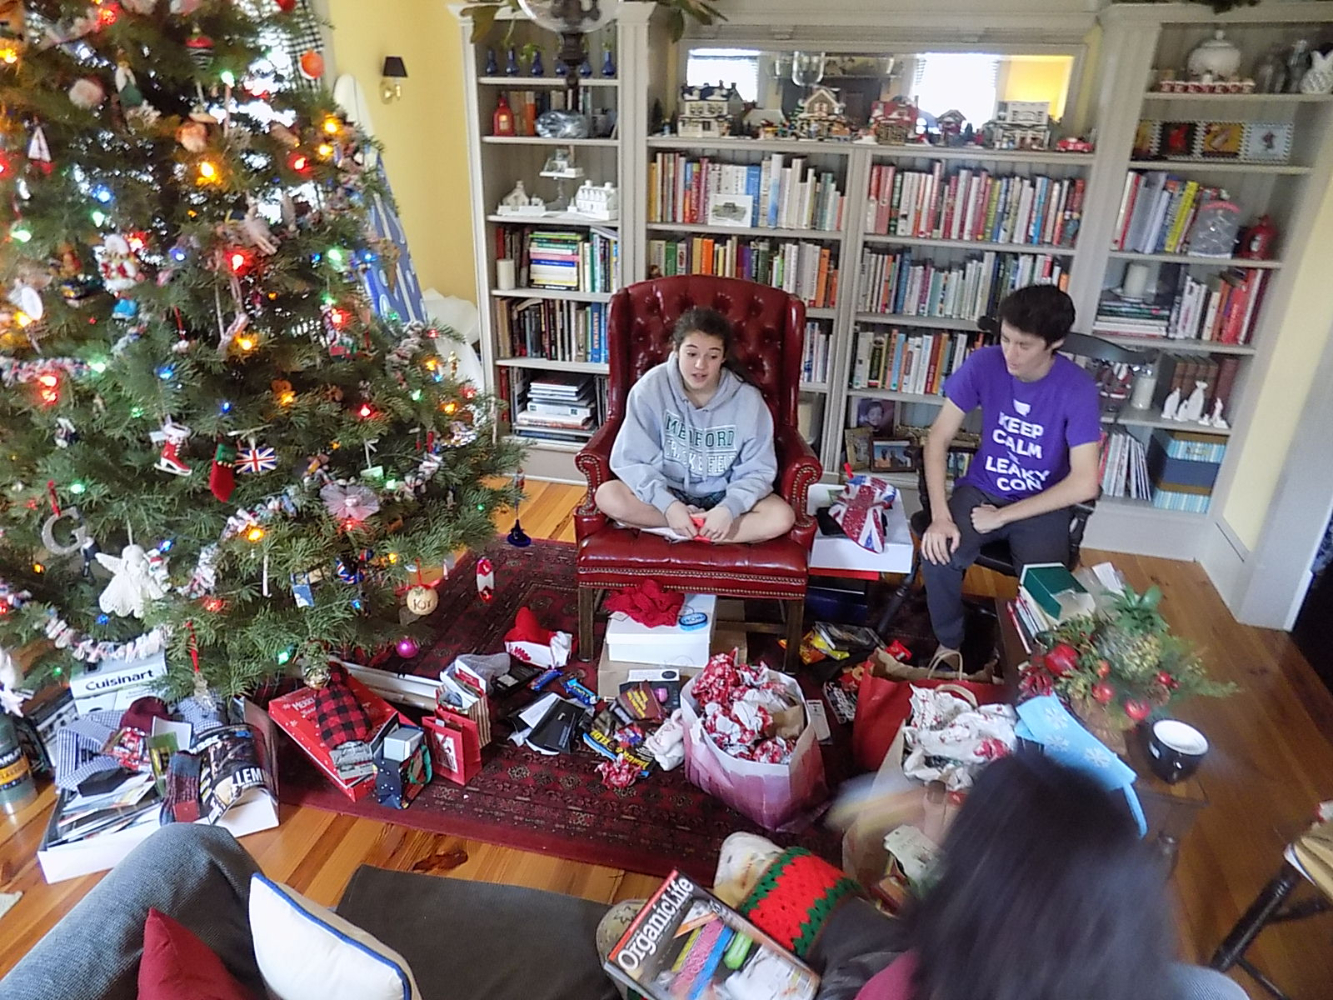 Christmas Morning in the Study